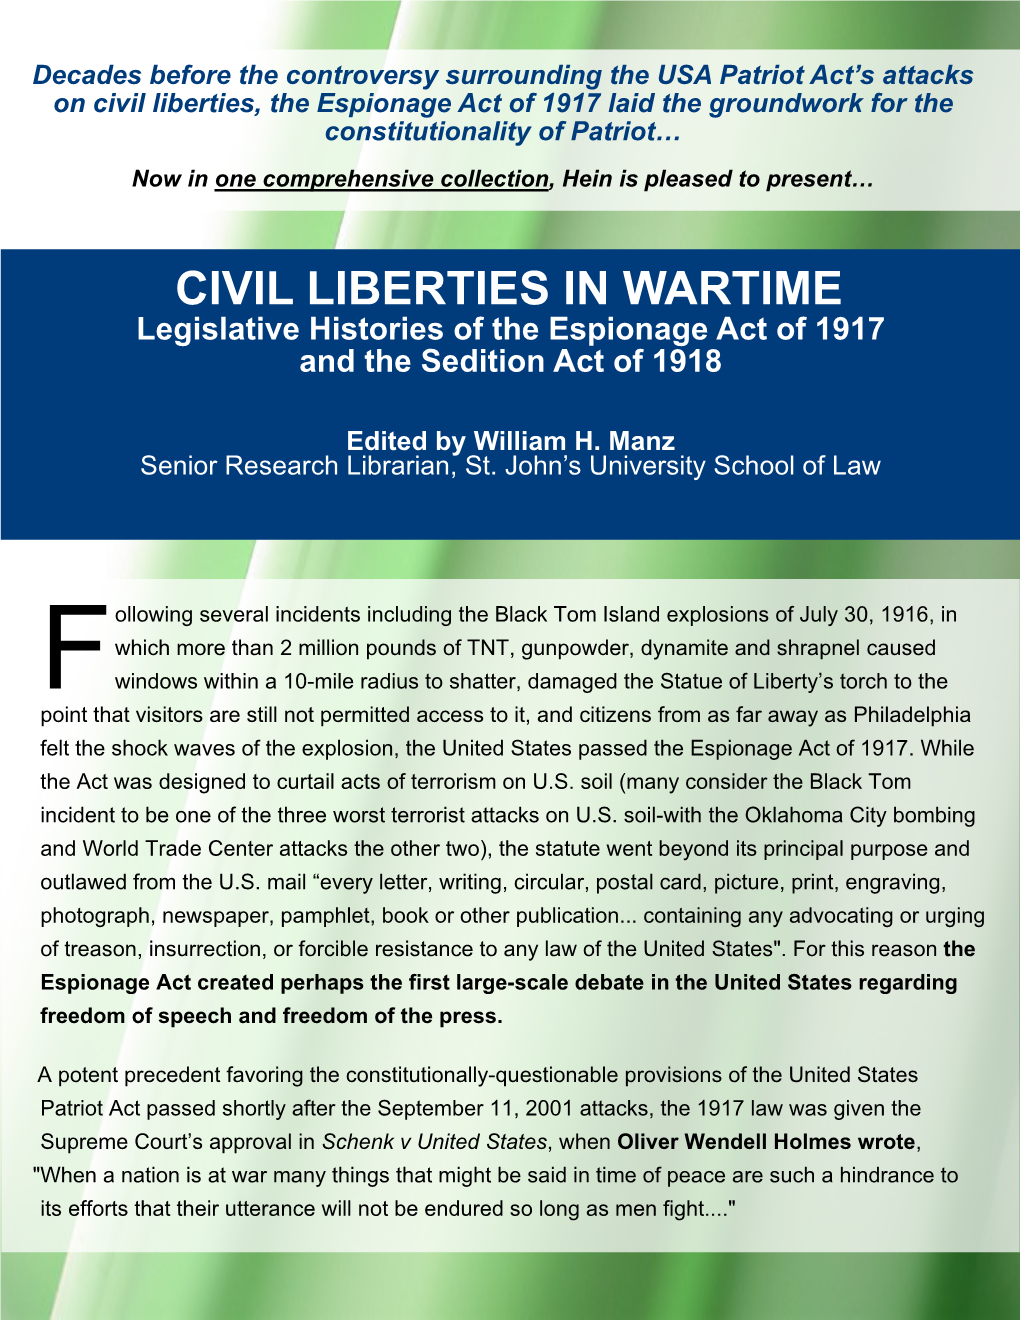 CIVIL LIBERTIES in WARTIME Legislative Histories of the Espionage Act of 1917 and the Sedition Act of 1918